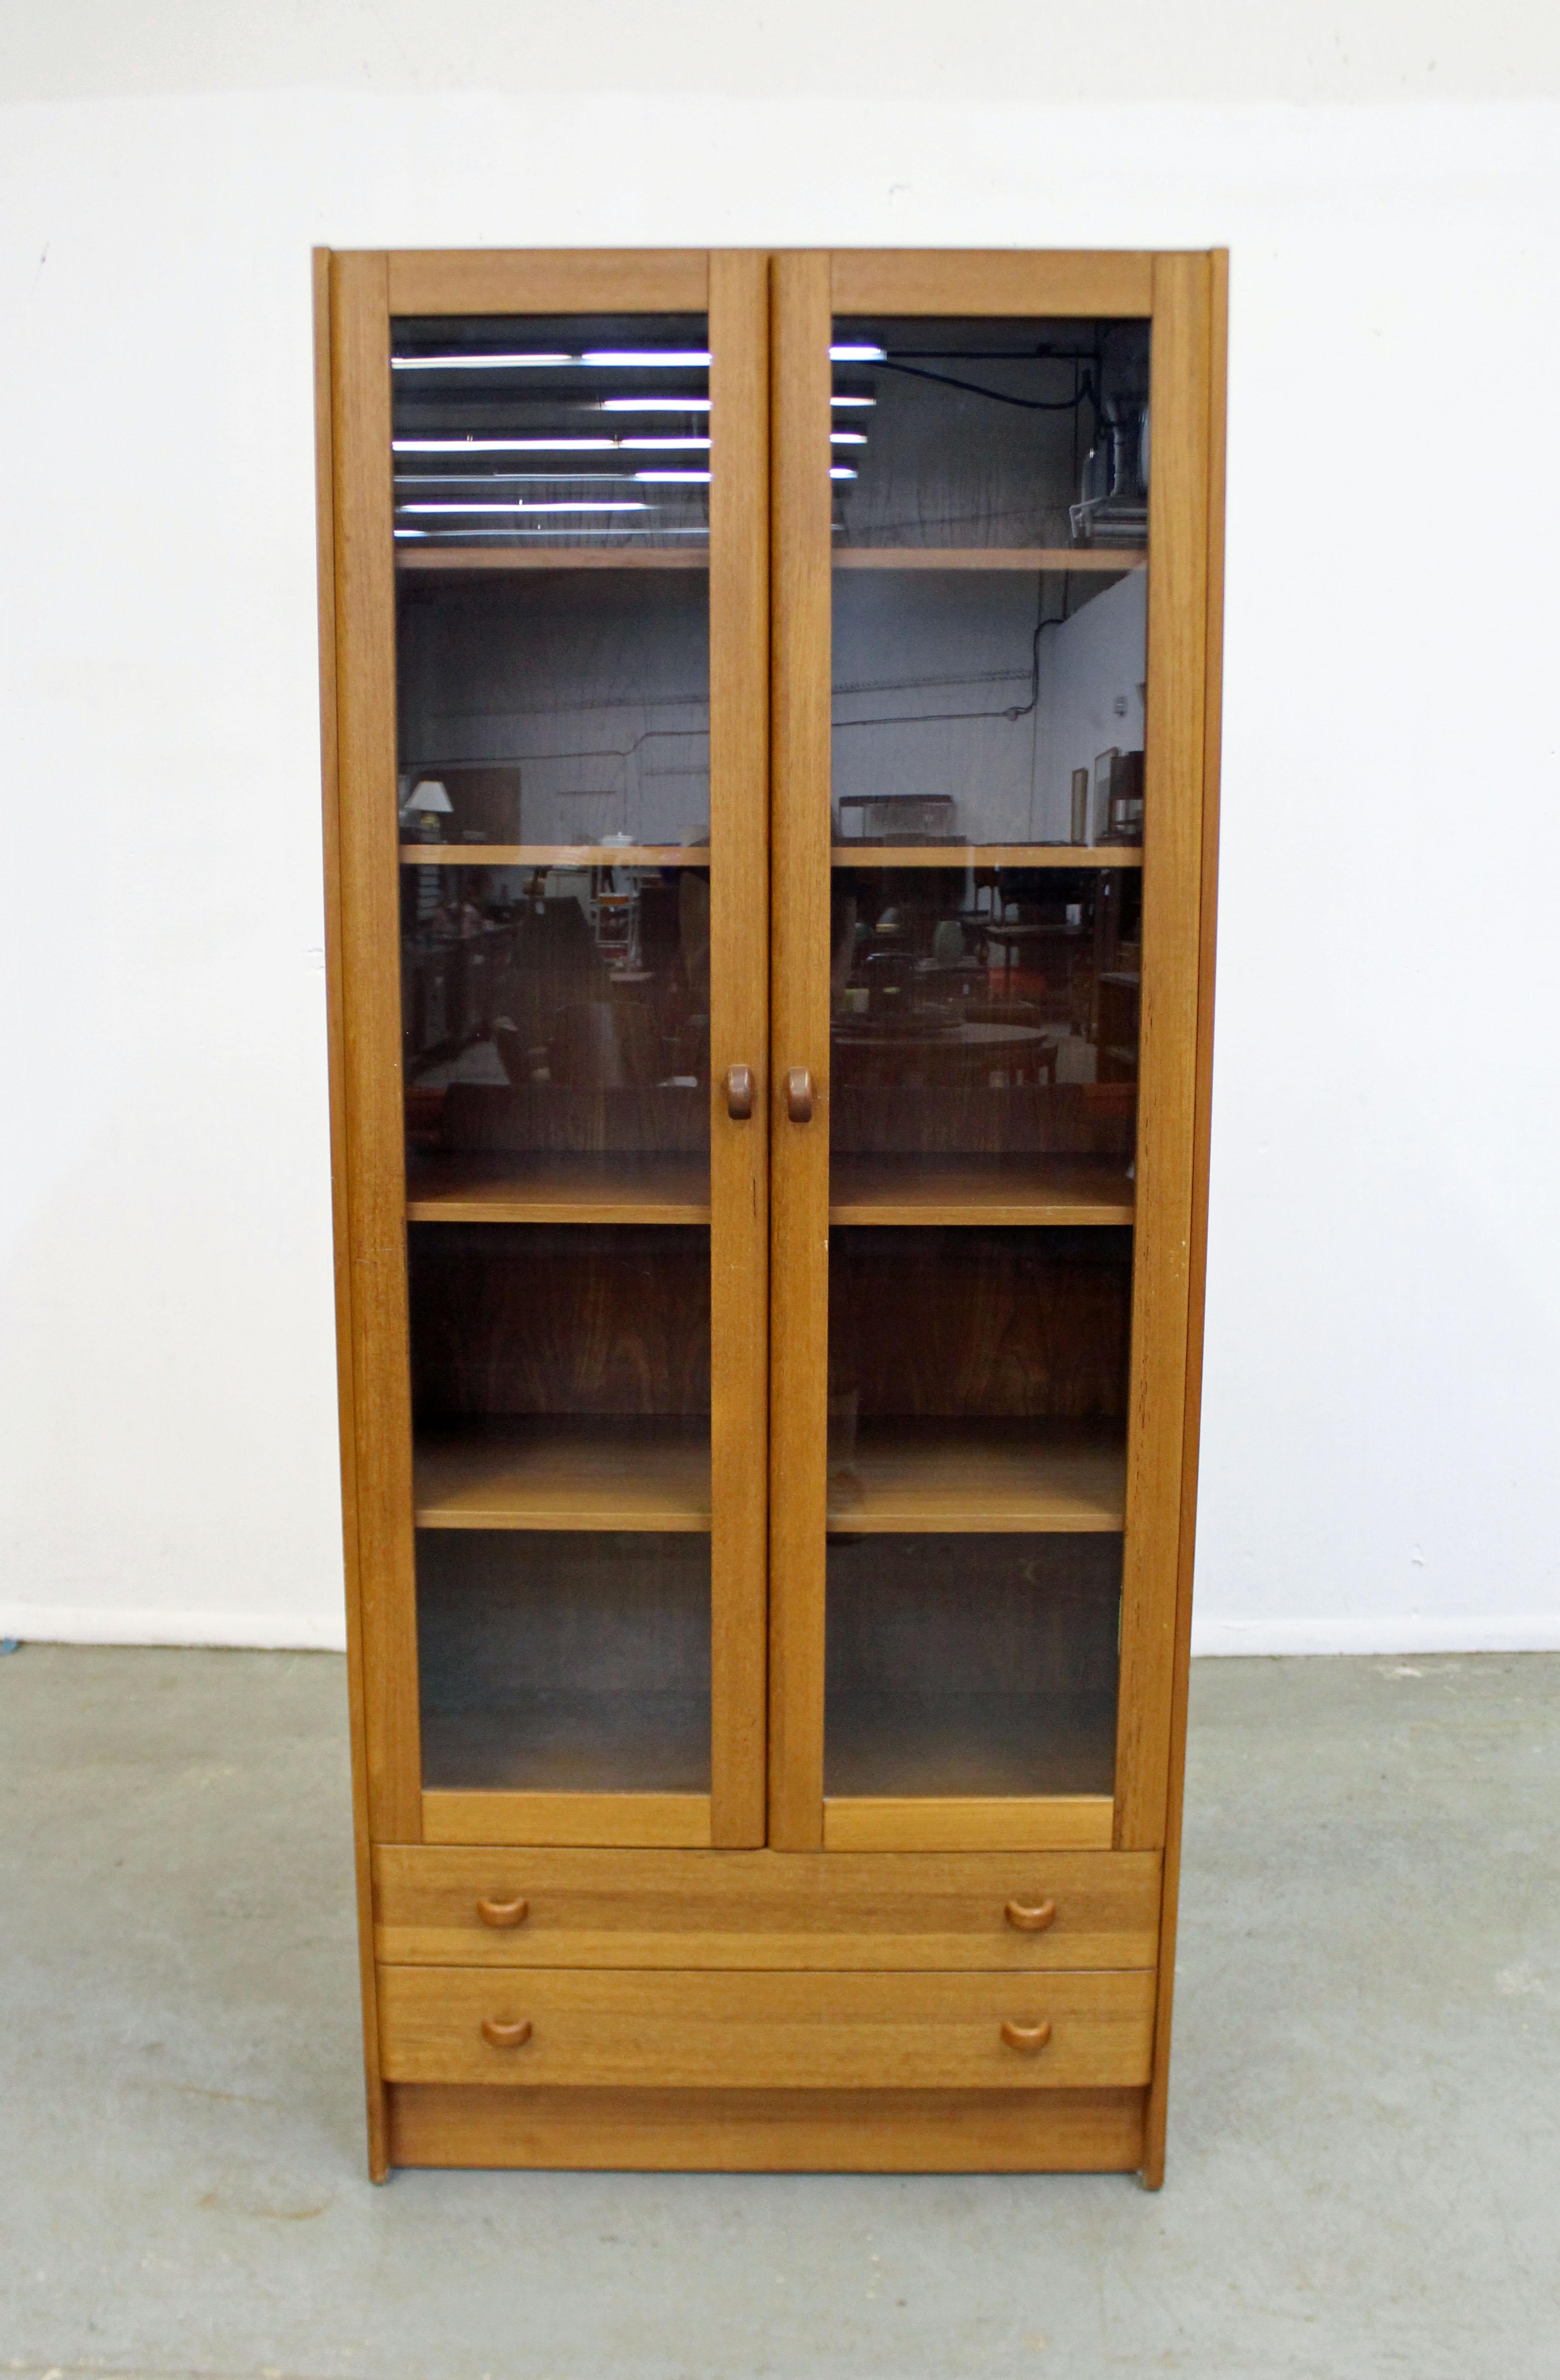 Offered is a Danish modern teak bookcase by Domino Mobler. This enclosed bookcase features two glass panel doors with three stationary shelves to the interior and two bottom drawers. It is marked on the back. See our other listings for more Danish